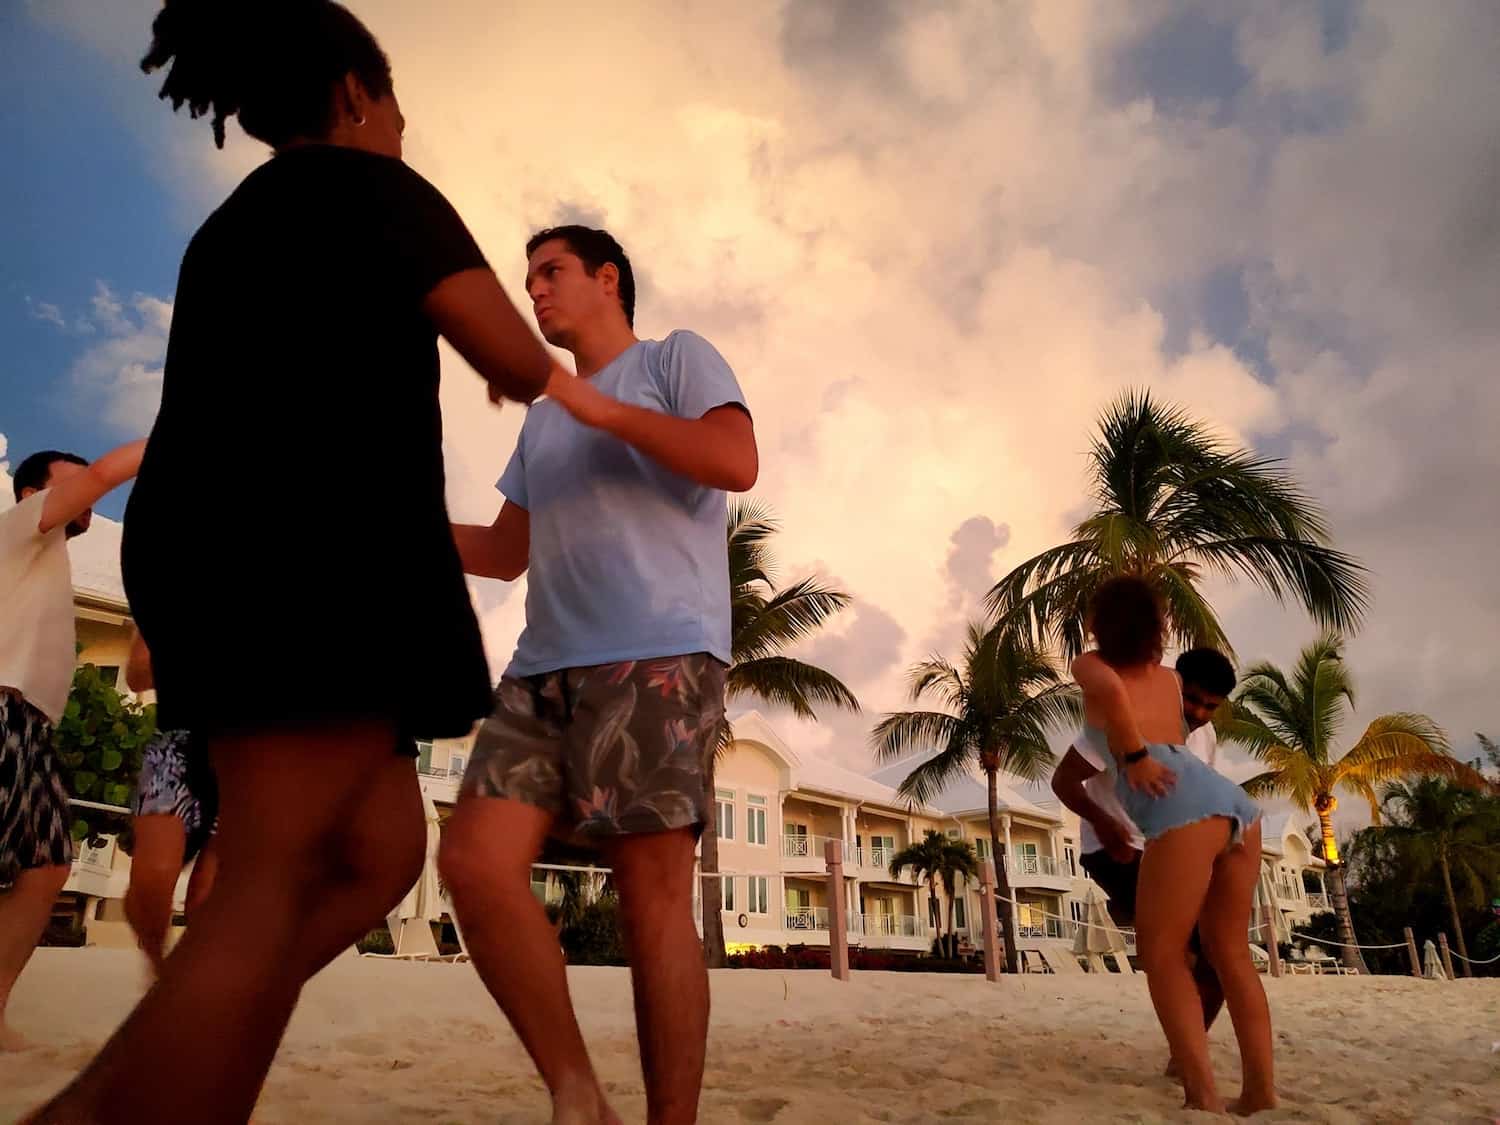 People dancing salsa on the beach in the Cayman Islands in front of a hotel